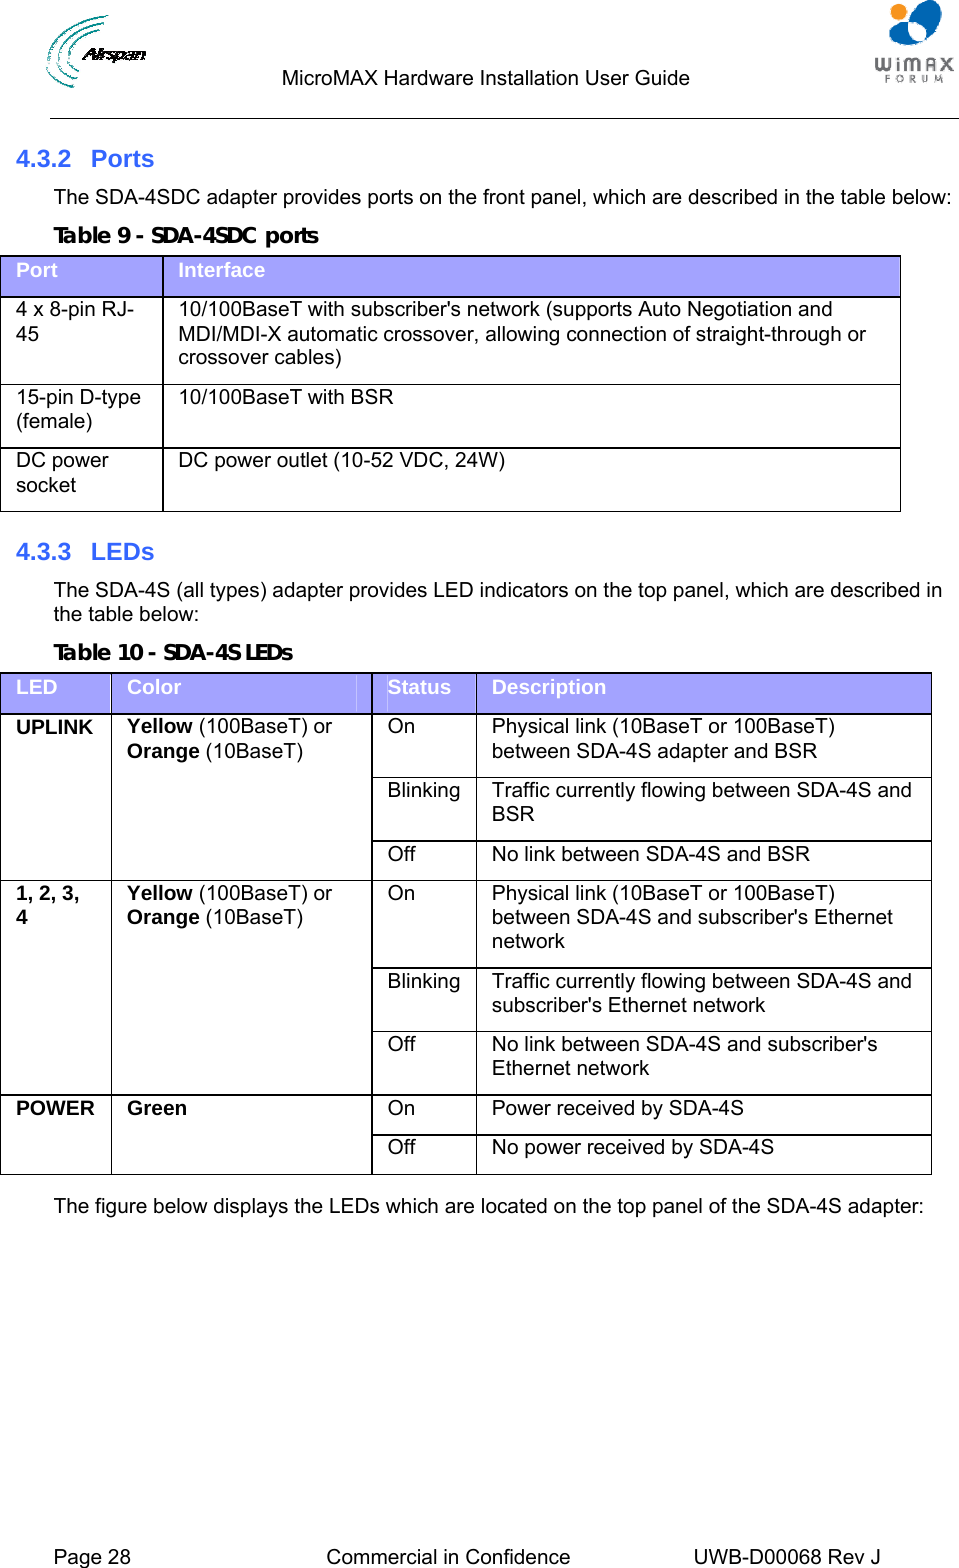                                  MicroMAX Hardware Installation User Guide     Page 28  Commercial in Confidence  UWB-D00068 Rev J   4.3.2 Ports The SDA-4SDC adapter provides ports on the front panel, which are described in the table below: Table 9 - SDA-4SDC ports Port  Interface 4 x 8-pin RJ-45 10/100BaseT with subscriber&apos;s network (supports Auto Negotiation and MDI/MDI-X automatic crossover, allowing connection of straight-through or crossover cables) 15-pin D-type (female) 10/100BaseT with BSR DC power socket DC power outlet (10-52 VDC, 24W) 4.3.3 LEDs The SDA-4S (all types) adapter provides LED indicators on the top panel, which are described in the table below: Table 10 - SDA-4S LEDs LED  Color  Status  Description On  Physical link (10BaseT or 100BaseT) between SDA-4S adapter and BSR Blinking  Traffic currently flowing between SDA-4S and BSR UPLINK  Yellow (100BaseT) or Orange (10BaseT) Off  No link between SDA-4S and BSR On  Physical link (10BaseT or 100BaseT) between SDA-4S and subscriber&apos;s Ethernet network Blinking  Traffic currently flowing between SDA-4S and subscriber&apos;s Ethernet network 1, 2, 3, 4  Yellow (100BaseT) or Orange (10BaseT) Off  No link between SDA-4S and subscriber&apos;s Ethernet network On  Power received by SDA-4S POWER Green Off  No power received by SDA-4S  The figure below displays the LEDs which are located on the top panel of the SDA-4S adapter: 